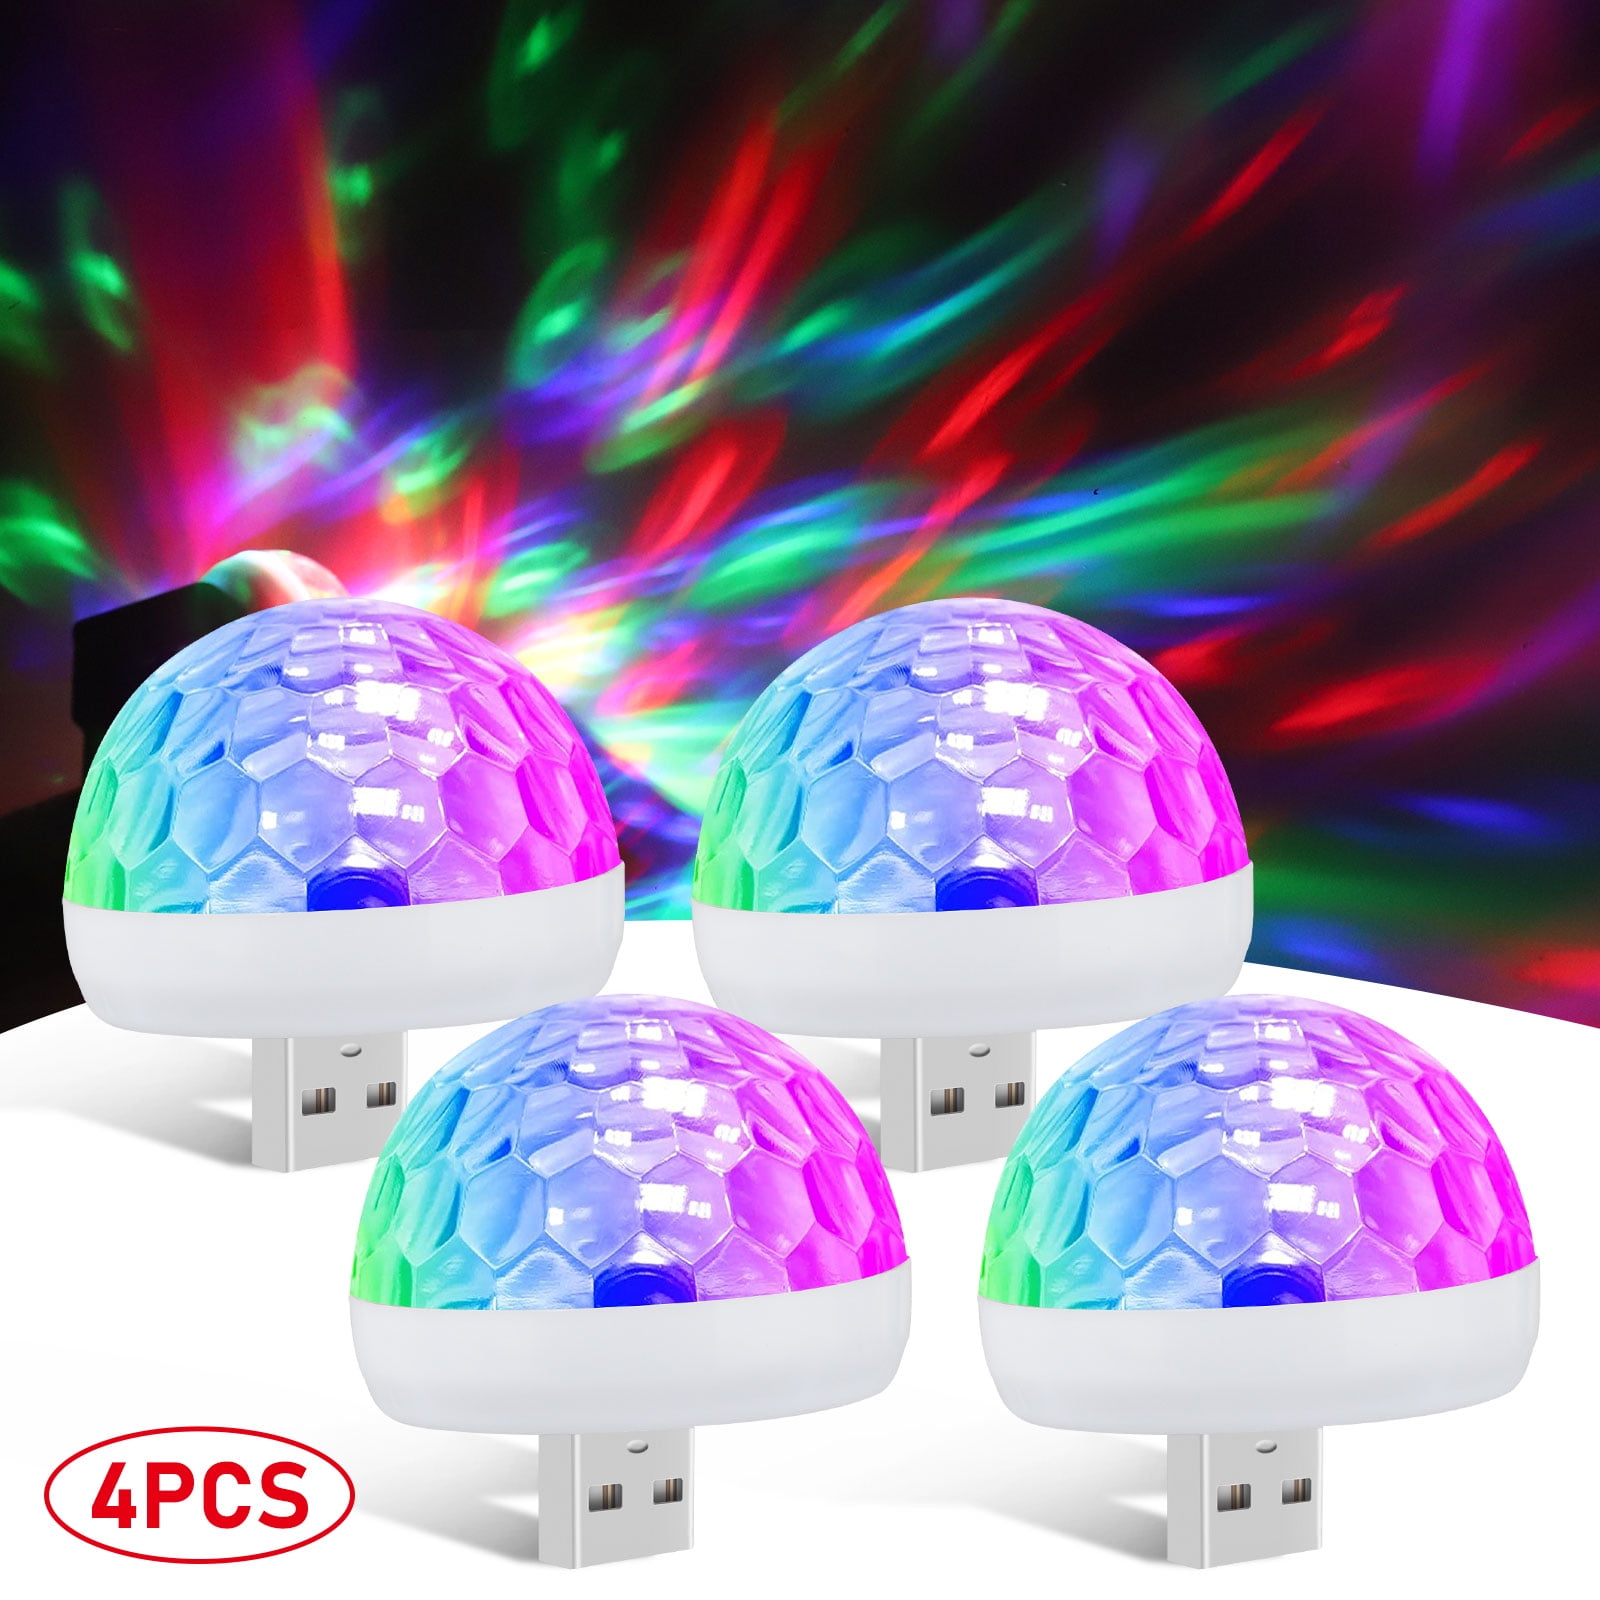 USB Mini Disco Lights Led Car USB Atmosphere Light Mini Portable Voice Control Stage DJ Strobe Light Portable Magic Ball Party Light Sound Activated Lights for Birthday Halloween Xmas Parties 